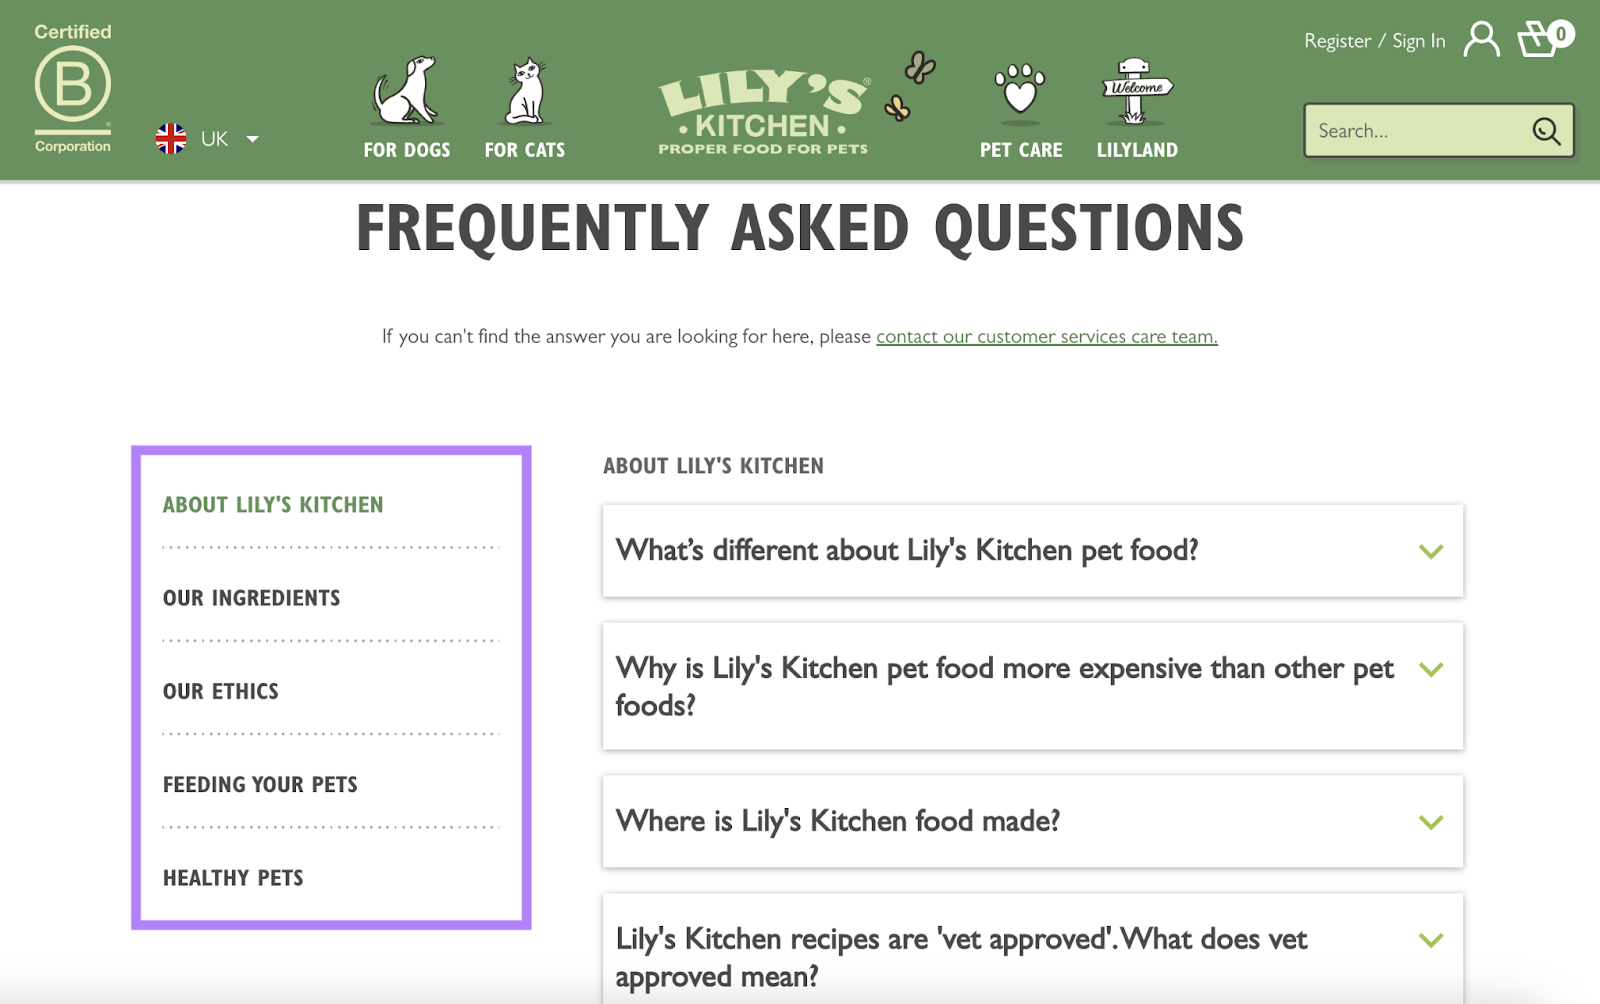 faqs in the lefthand navigation help you navigate the full page by topic such as ethics, ingredients, and how to feed your pets